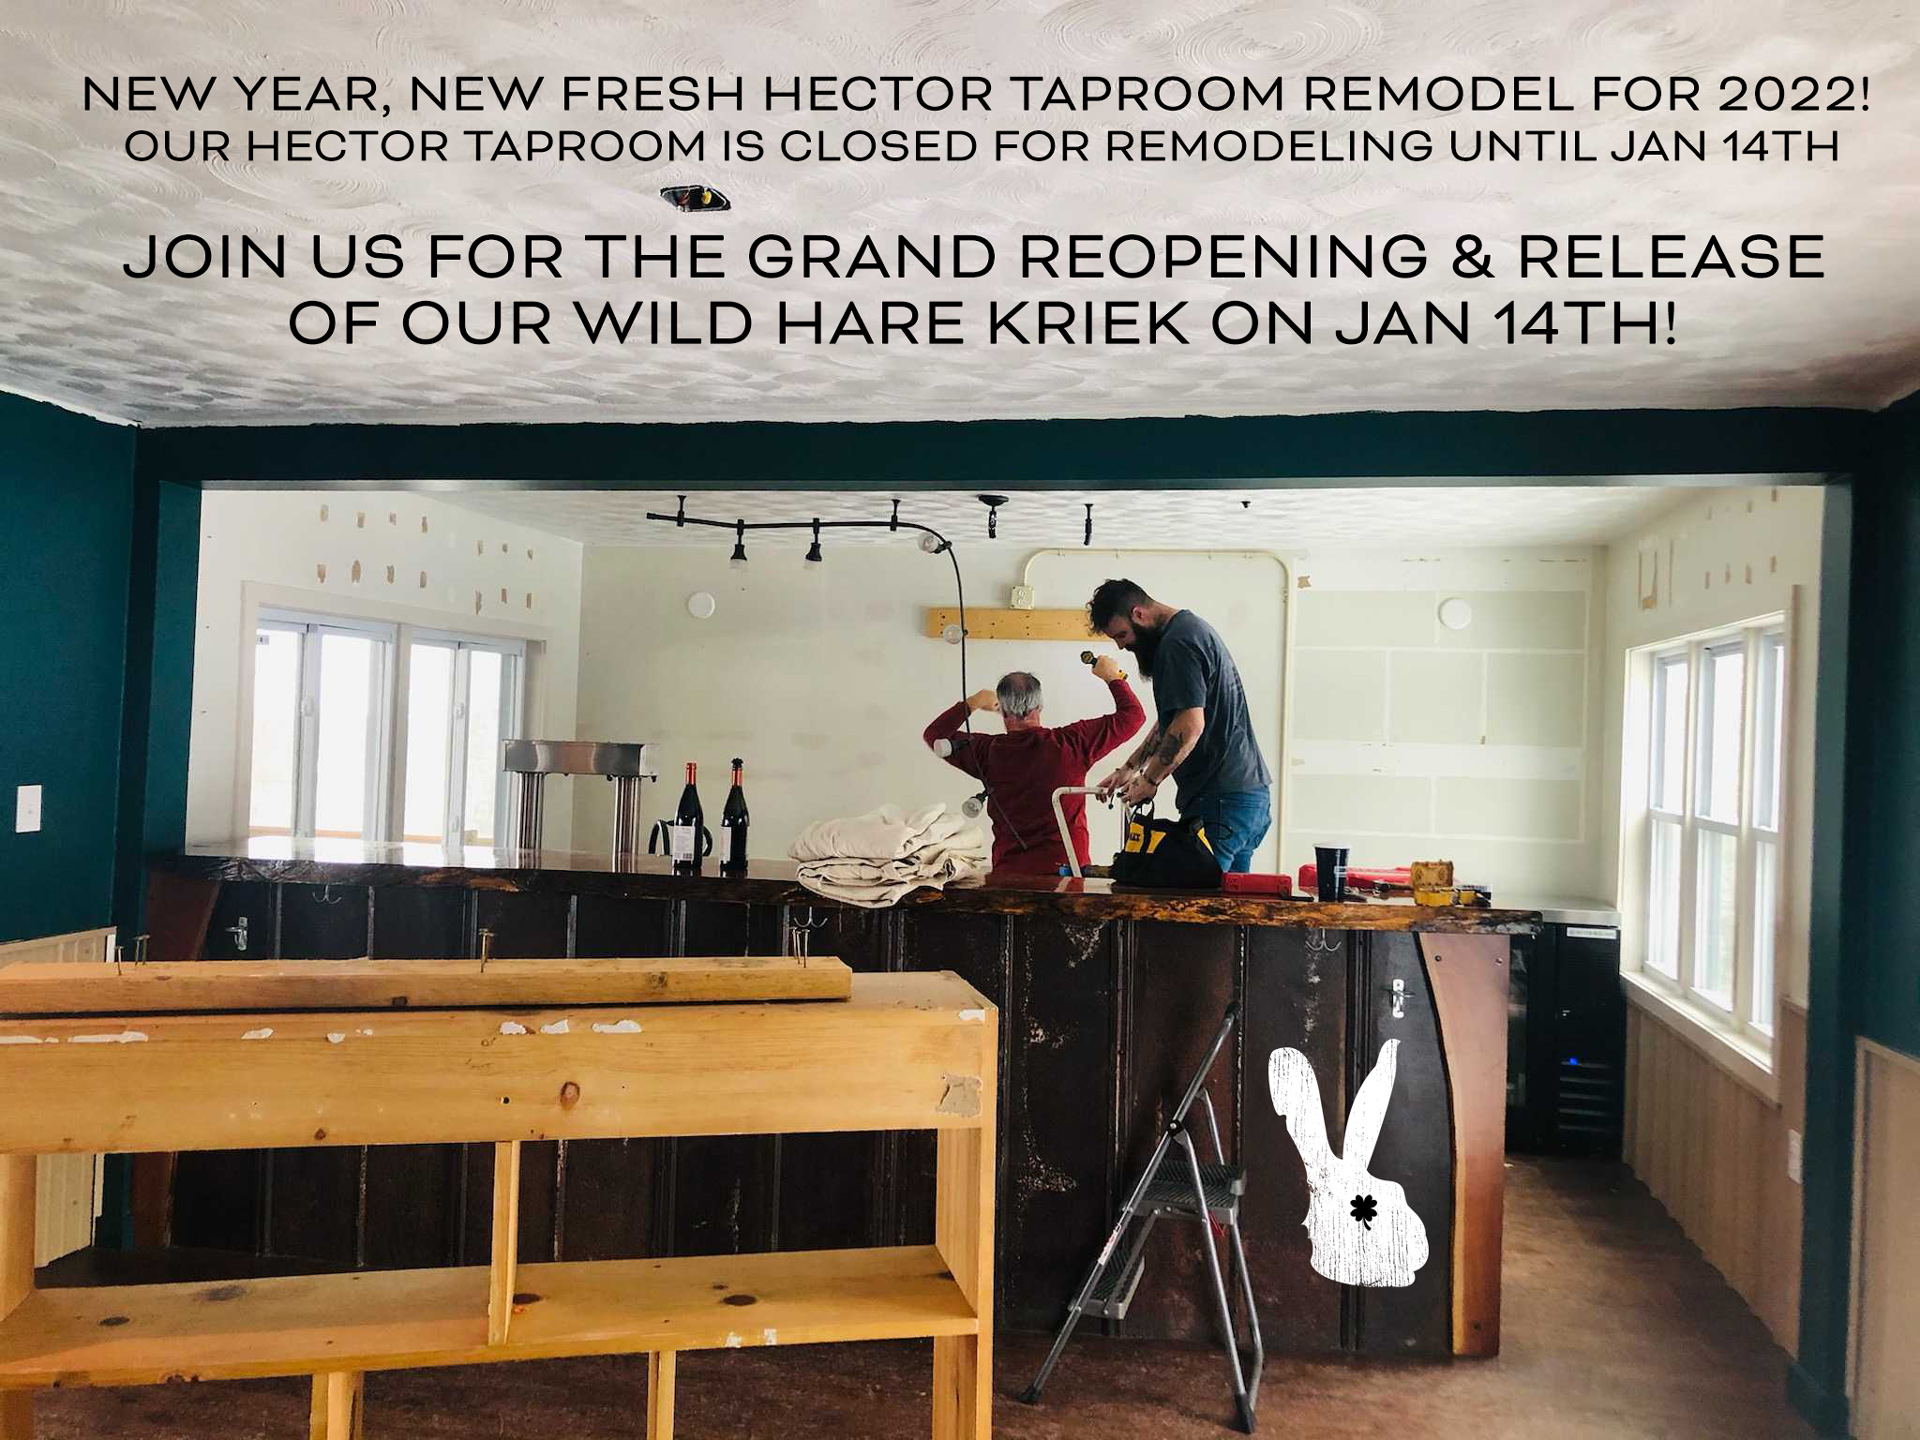 NEW YEAR, NEW FRESH HECTOR TAPROOM REMODEL FOR 2022! 